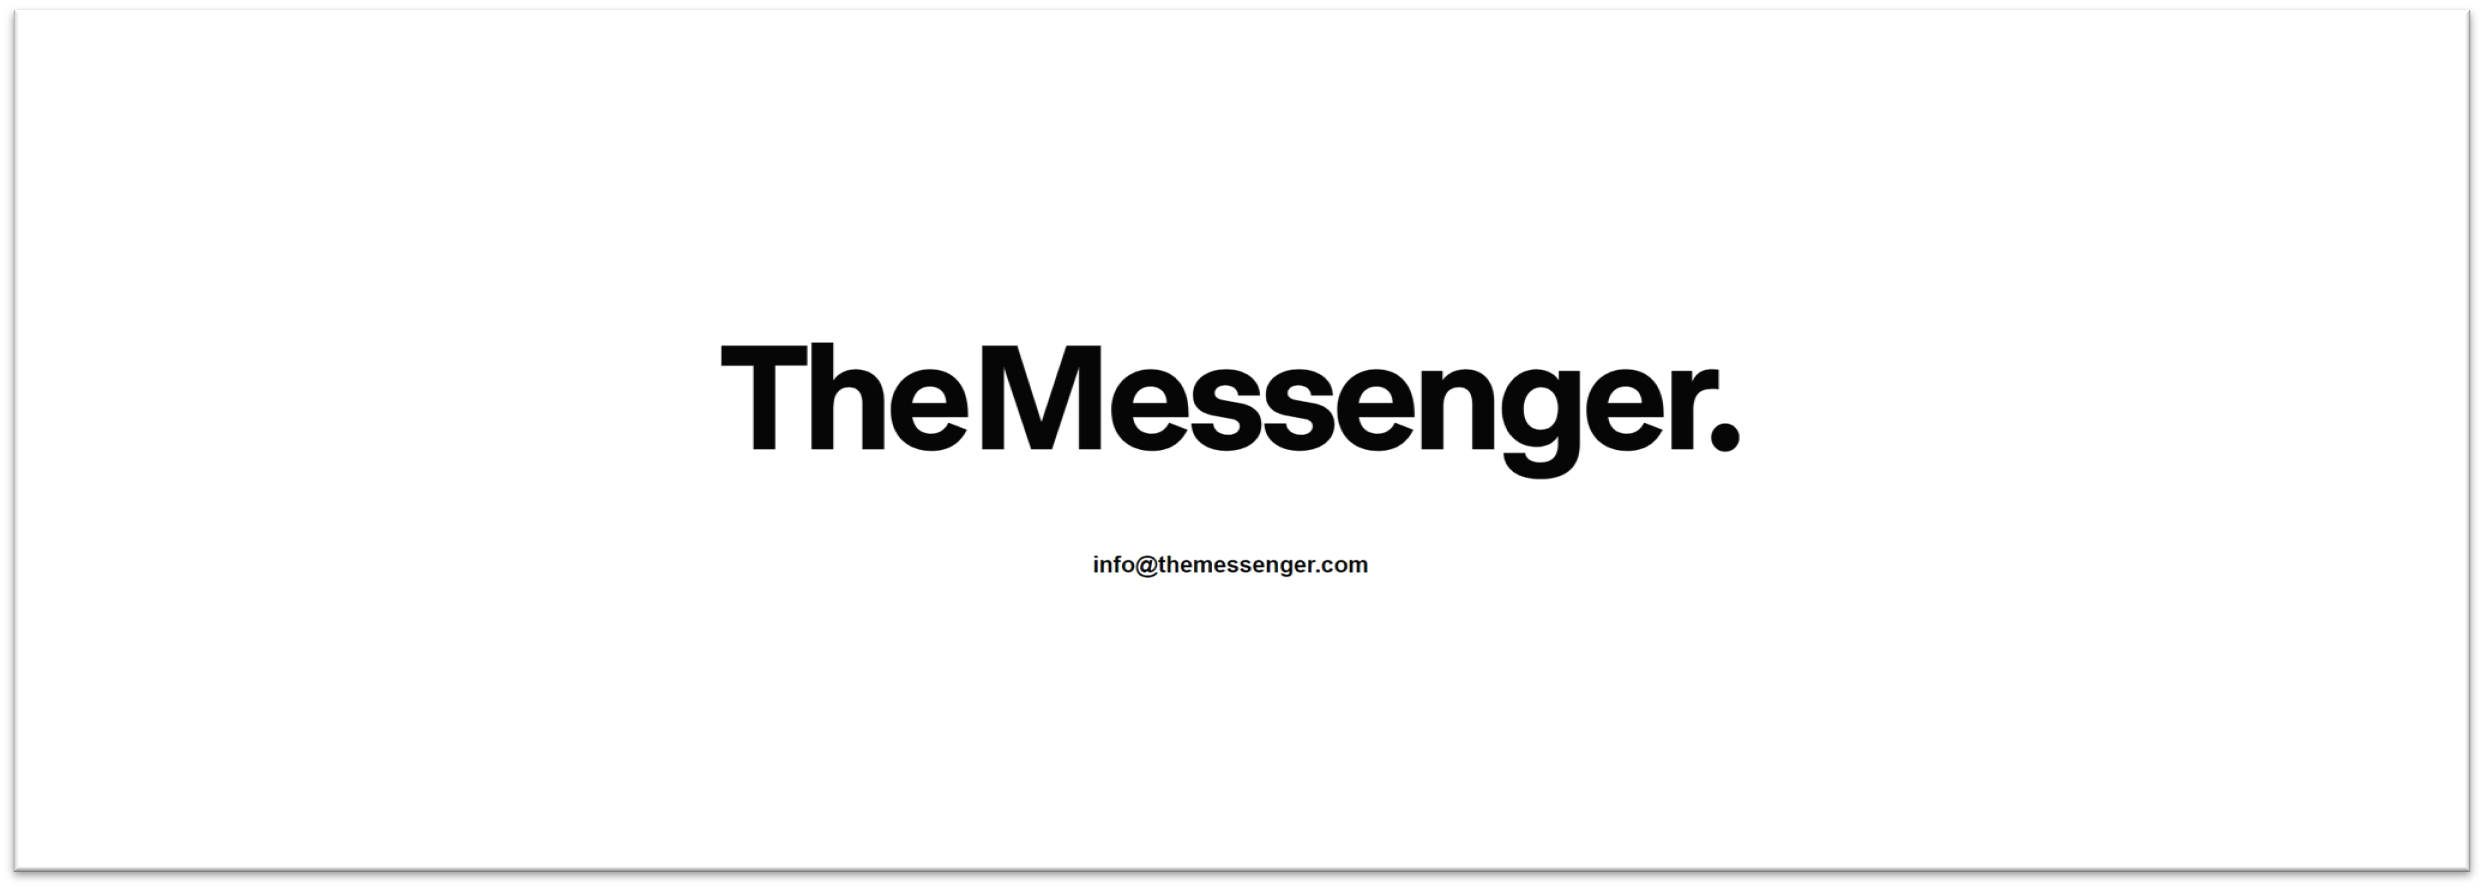 Centrist news media startup The Messenger is shutting down just eight months after its launch, becoming the latest media organization to see mass layoffs.